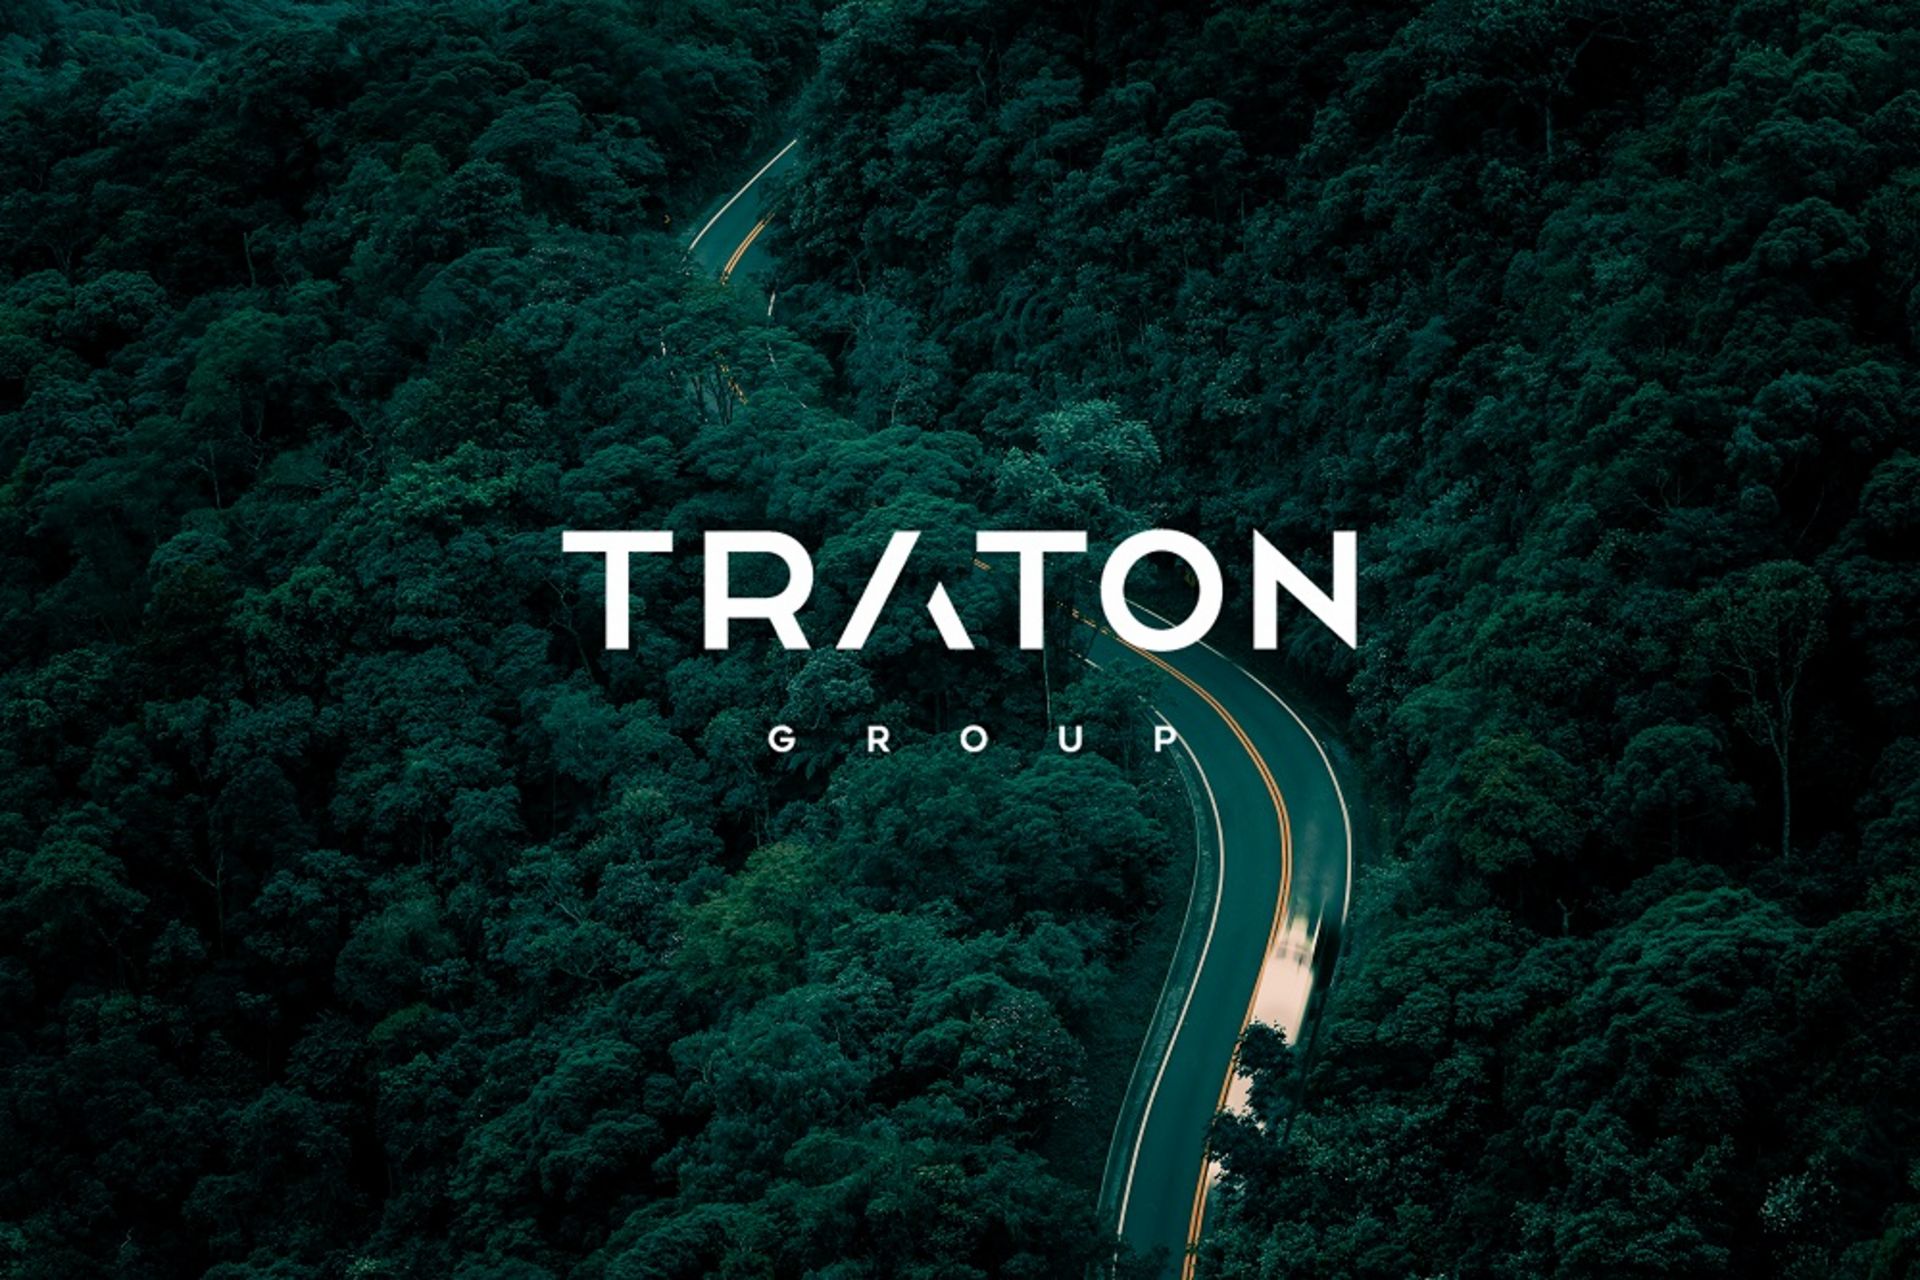 The TRATON GROUP logo on a background with a road leading through a forest.
                 